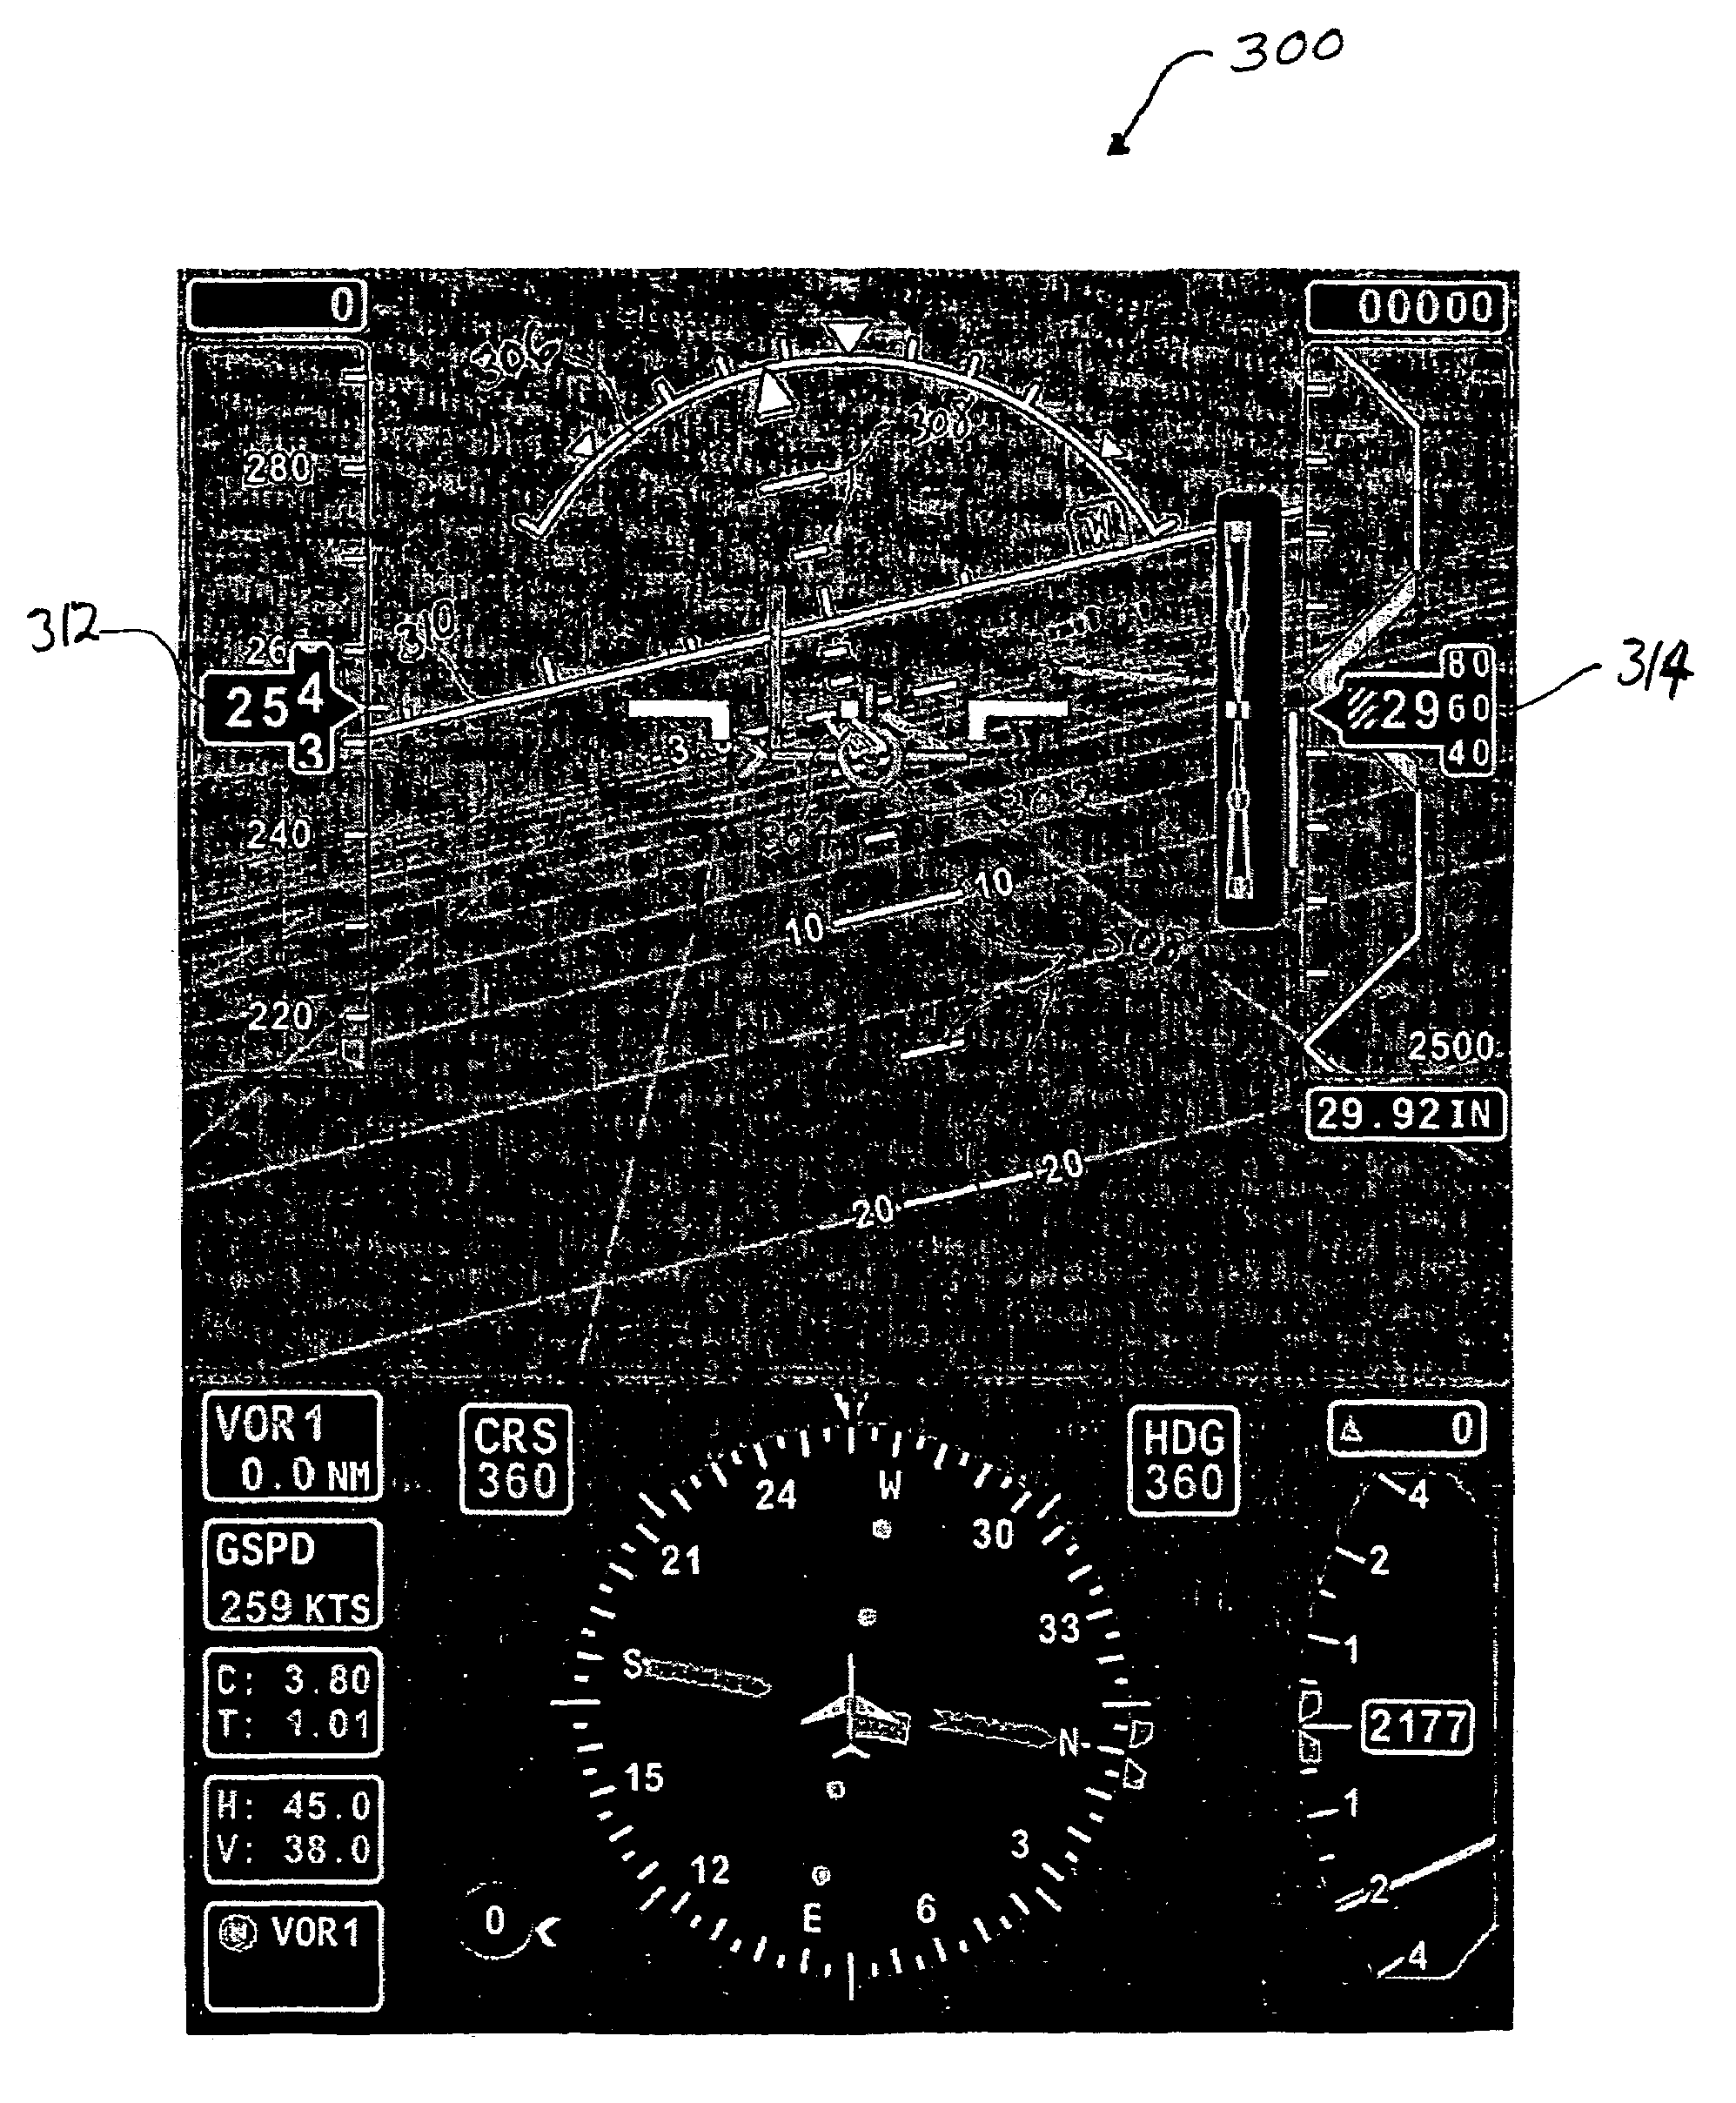 System and method for facilitating target aiming and aircraft control using aircraft displays